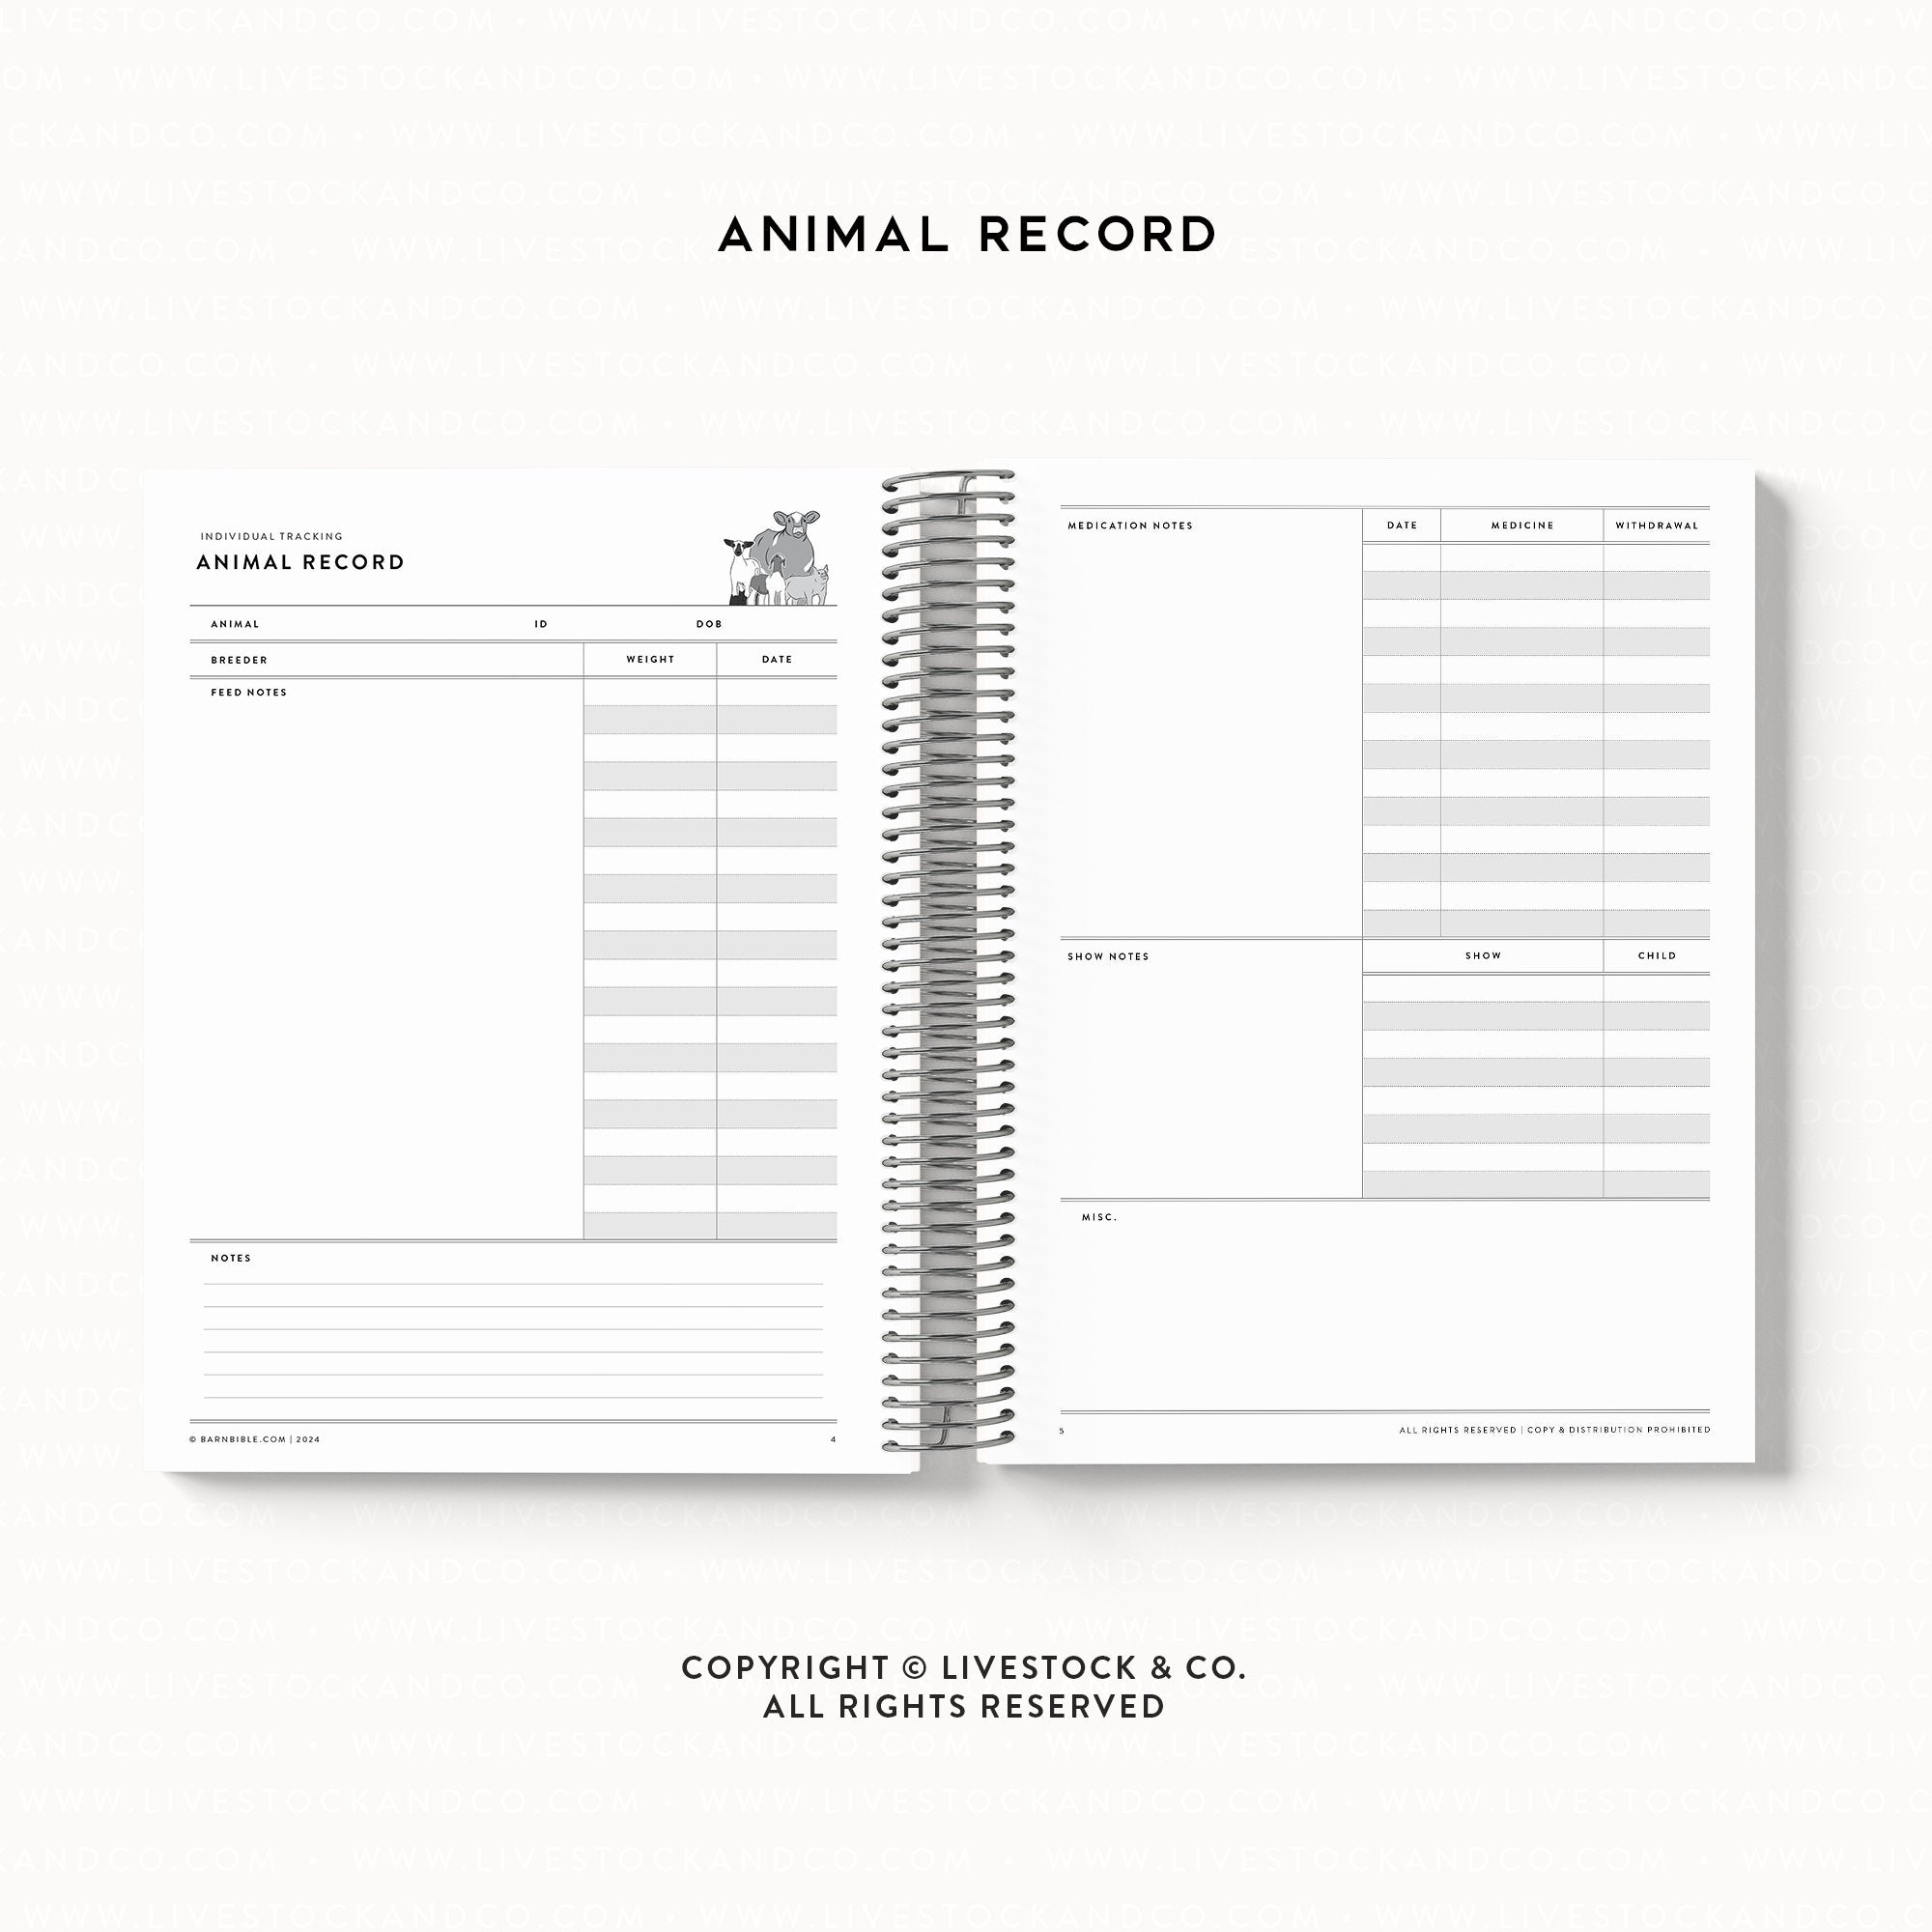 Personalized-Livestock-Animal Record Planner - Cheetah Cover